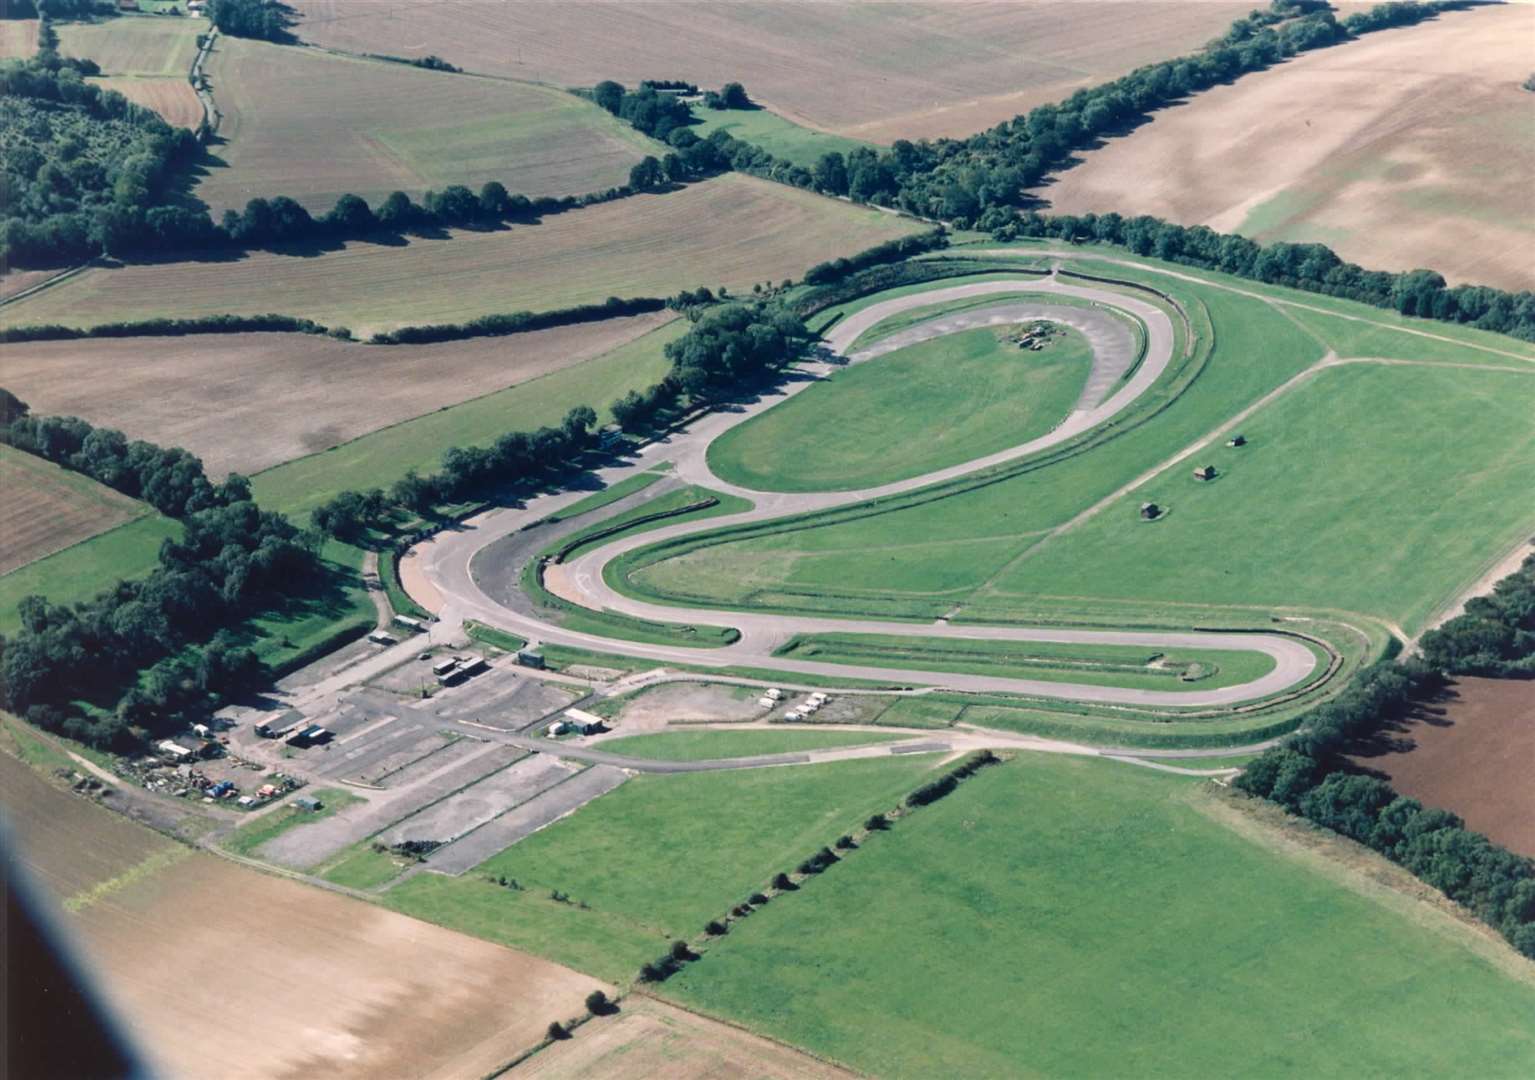 Lydden Hill race circuit - most famous for being the 'home of rallycross' - pictured in 1995. The general look of the circuit has hardly changed since, but two spectator stands, a circuit office and new commentary box have been installed in the years since. Earlier this year, plans were approved by Dover District Council for new state-of-the-art facilities and a new access road off the A2.